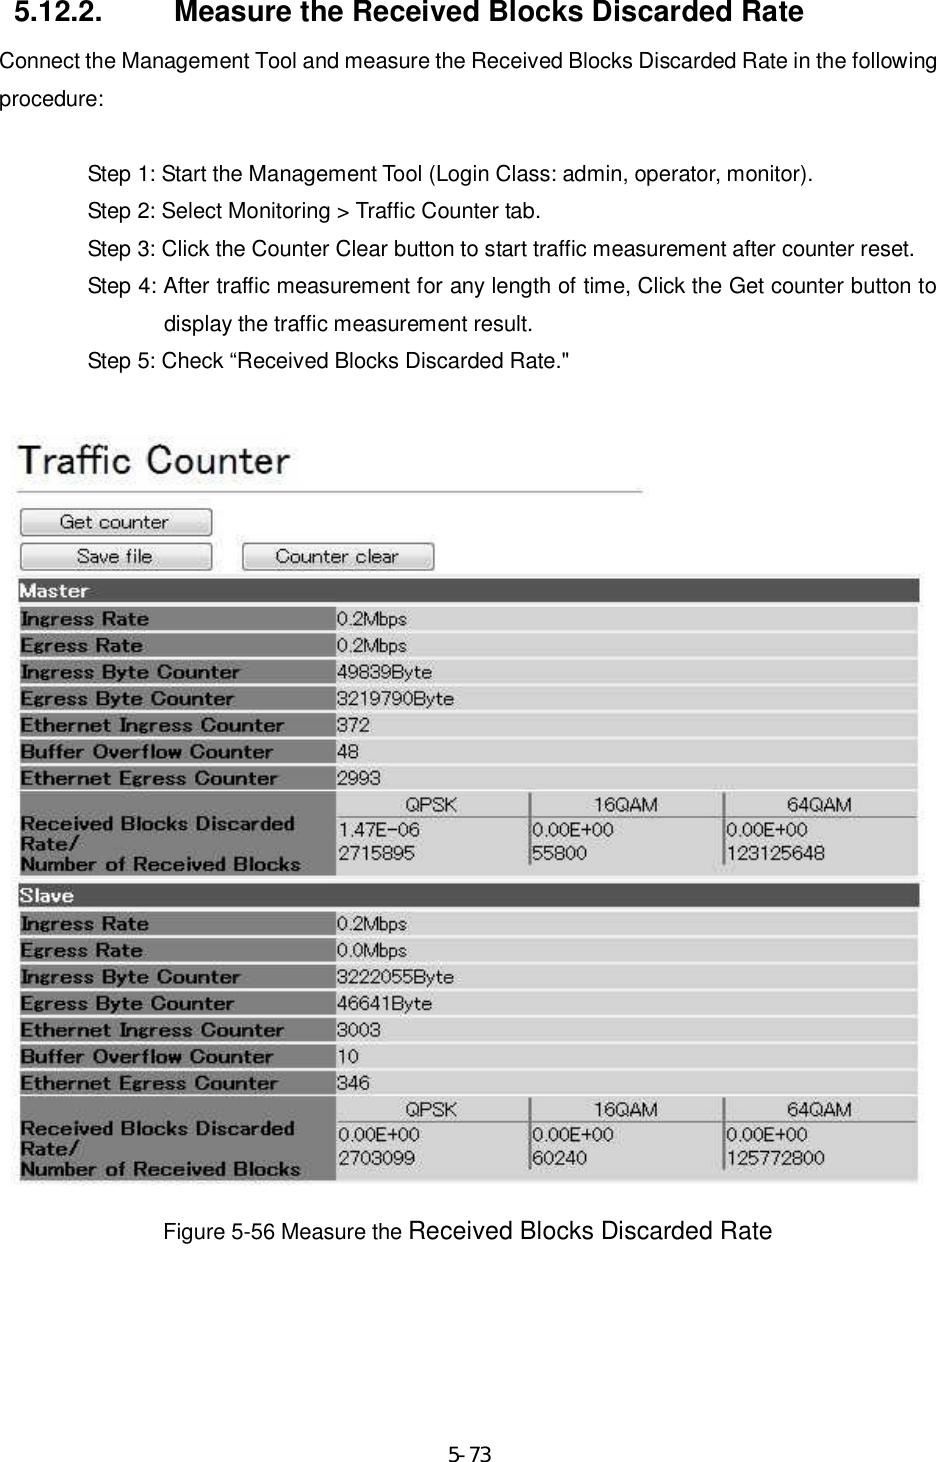     5-735.12.2.  Measure the Received Blocks Discarded Rate Connect the Management Tool and measure the Received Blocks Discarded Rate in the following procedure:  Step 1: Start the Management Tool (Login Class: admin, operator, monitor). Step 2: Select Monitoring &gt; Traffic Counter tab. Step 3: Click the Counter Clear button to start traffic measurement after counter reset. Step 4: After traffic measurement for any length of time, Click the Get counter button to display the traffic measurement result. Step 5: Check “Received Blocks Discarded Rate.&quot;   Figure 5-56 Measure the Received Blocks Discarded Rate  